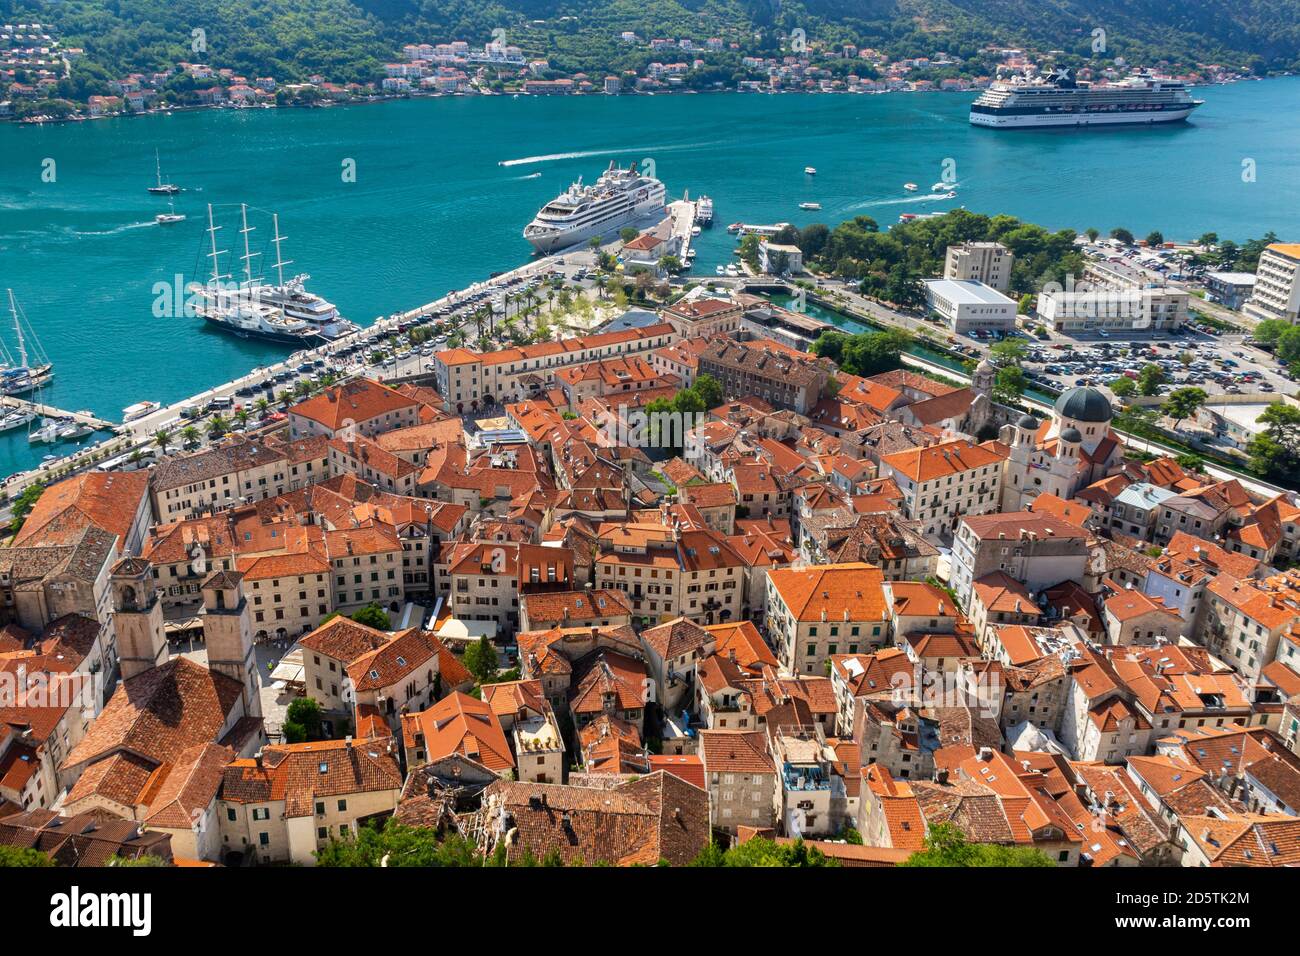 Looking down on the walled old town of Kotor, Montenegro Stock Photo